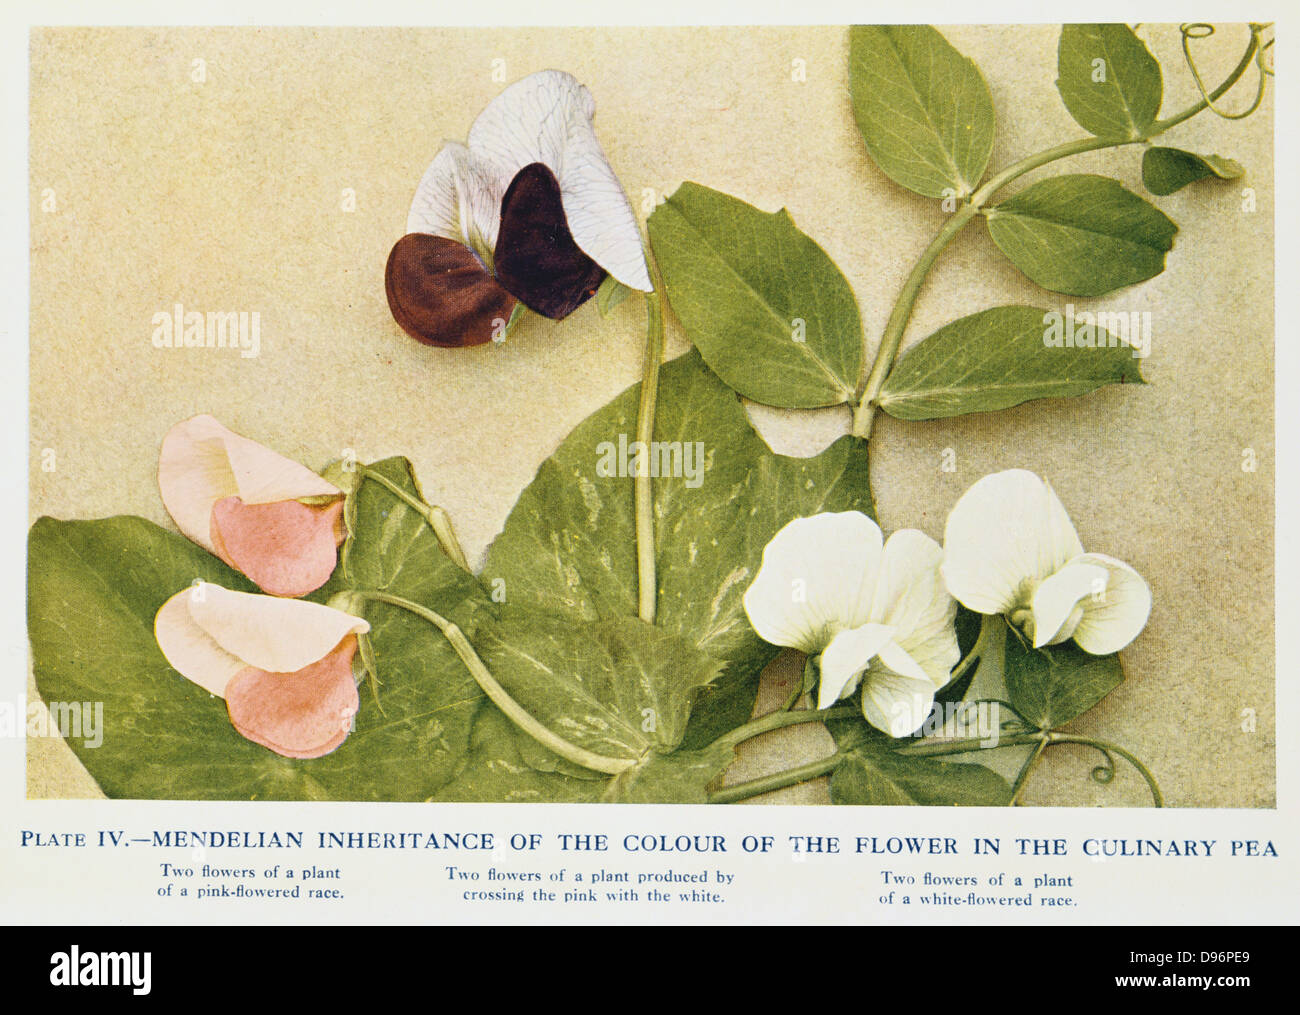 Mendelian inheritance of colour of flower in the culinary pea  Pink-flowered race (left), White-flowered race (right), Cross between the two, (centre). From 'Breeding and Mendelian Discovery', AD Darbishire, (London, 1912). Austrian monk Gregor Mendel (1822-1884) read his paper on 'Plant Hybridisation' in 1865, but it went unnoticed for 34 years. Mendel's Laws of Inheritance or Mendelism formed the basis of later studies in genetics. Stock Photo